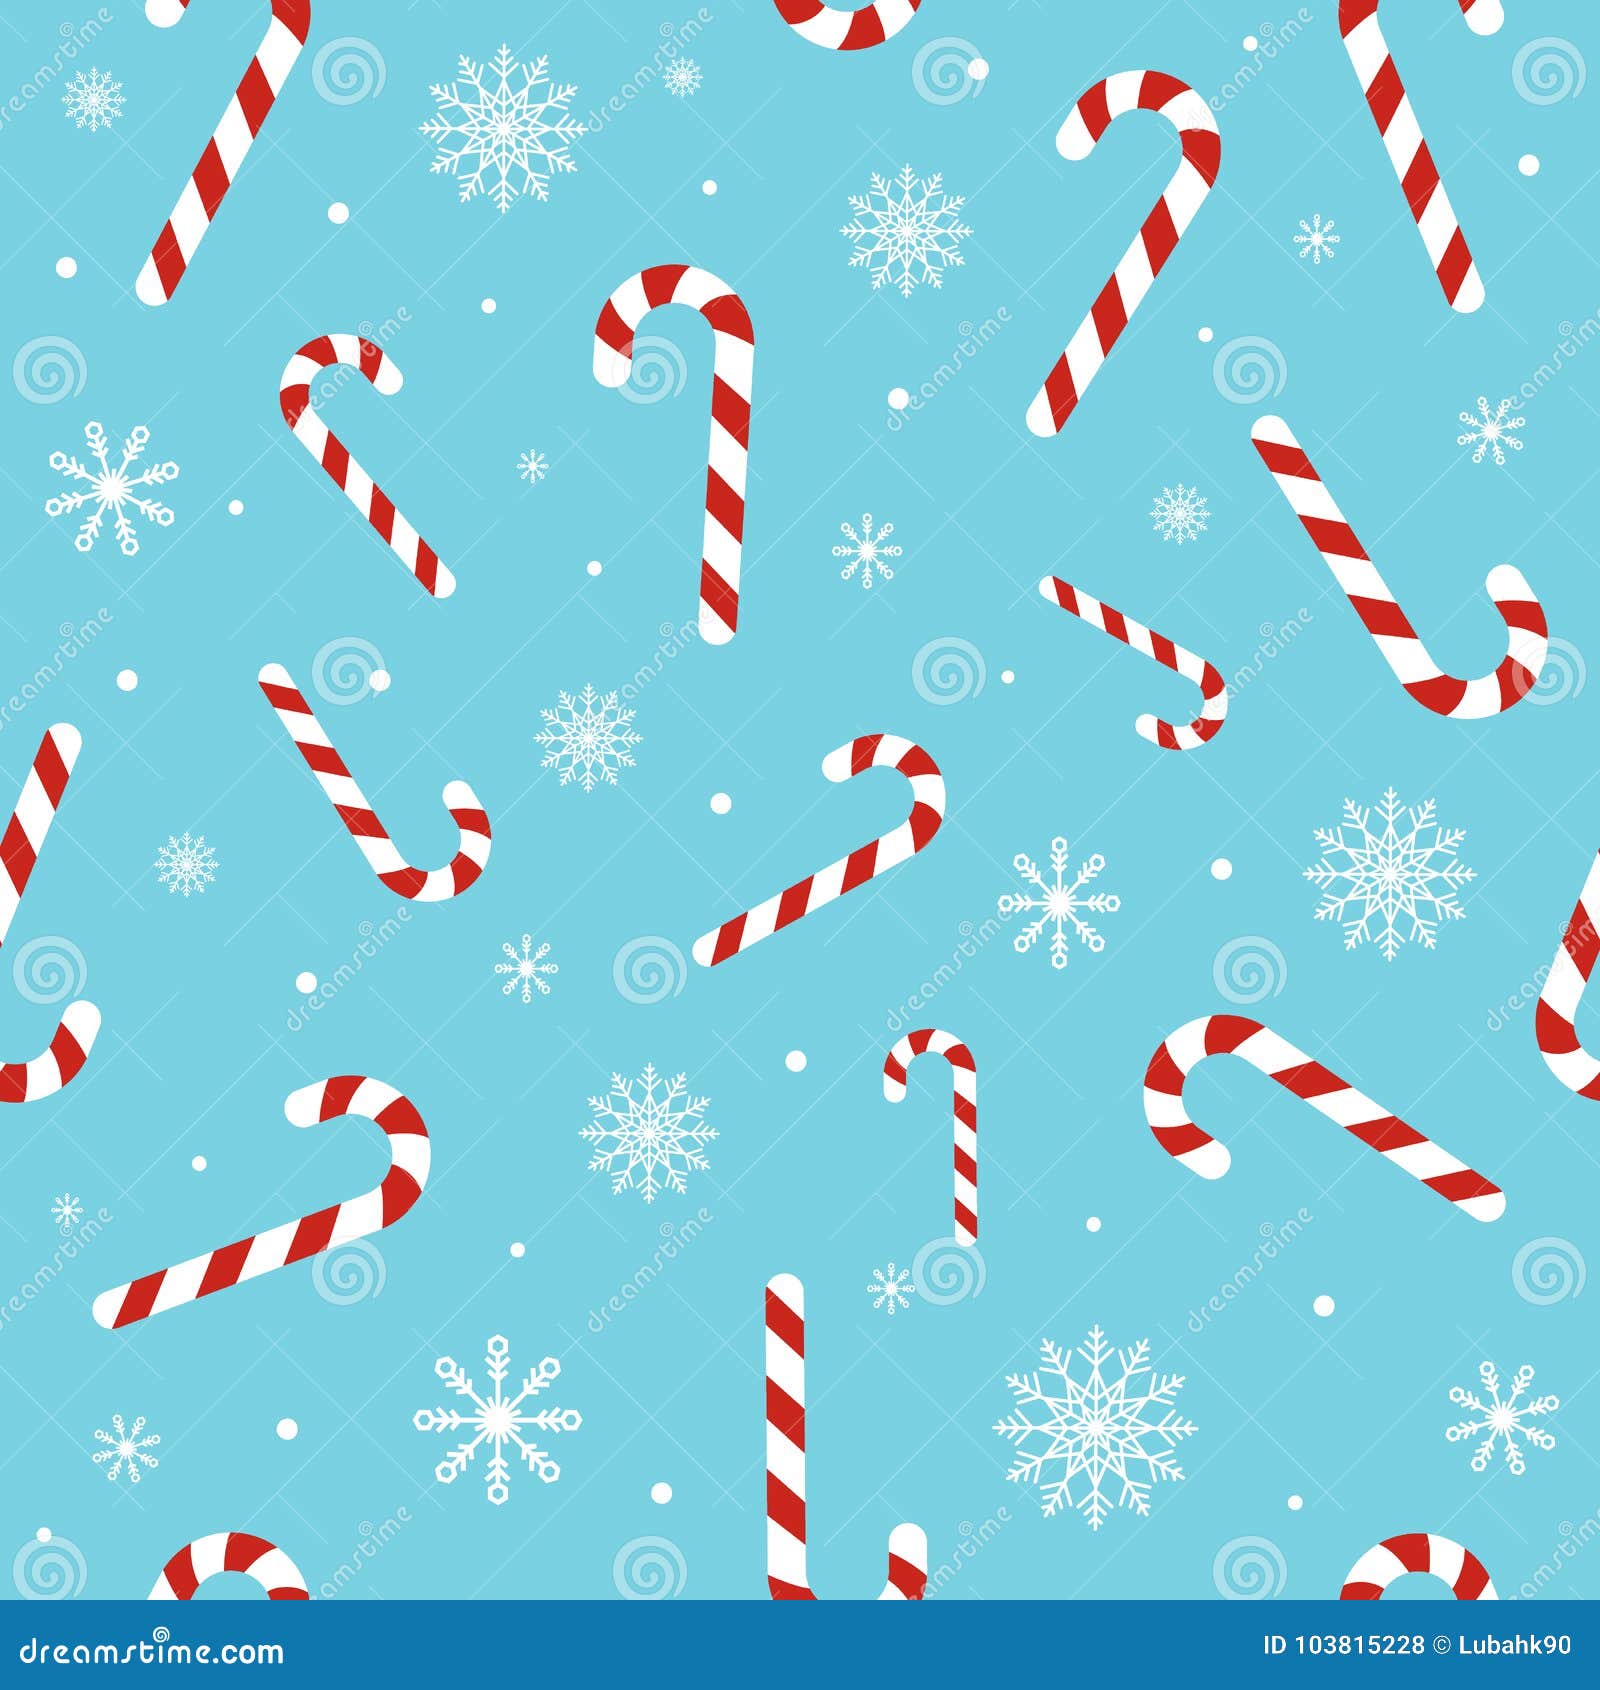 Christmas Seamless Pattern With Candy Canes Snowflakes Snow Ball On Blue Background Background For Wrapping Paper Stock Vector Illustration Of Seamless Fabric 103815228